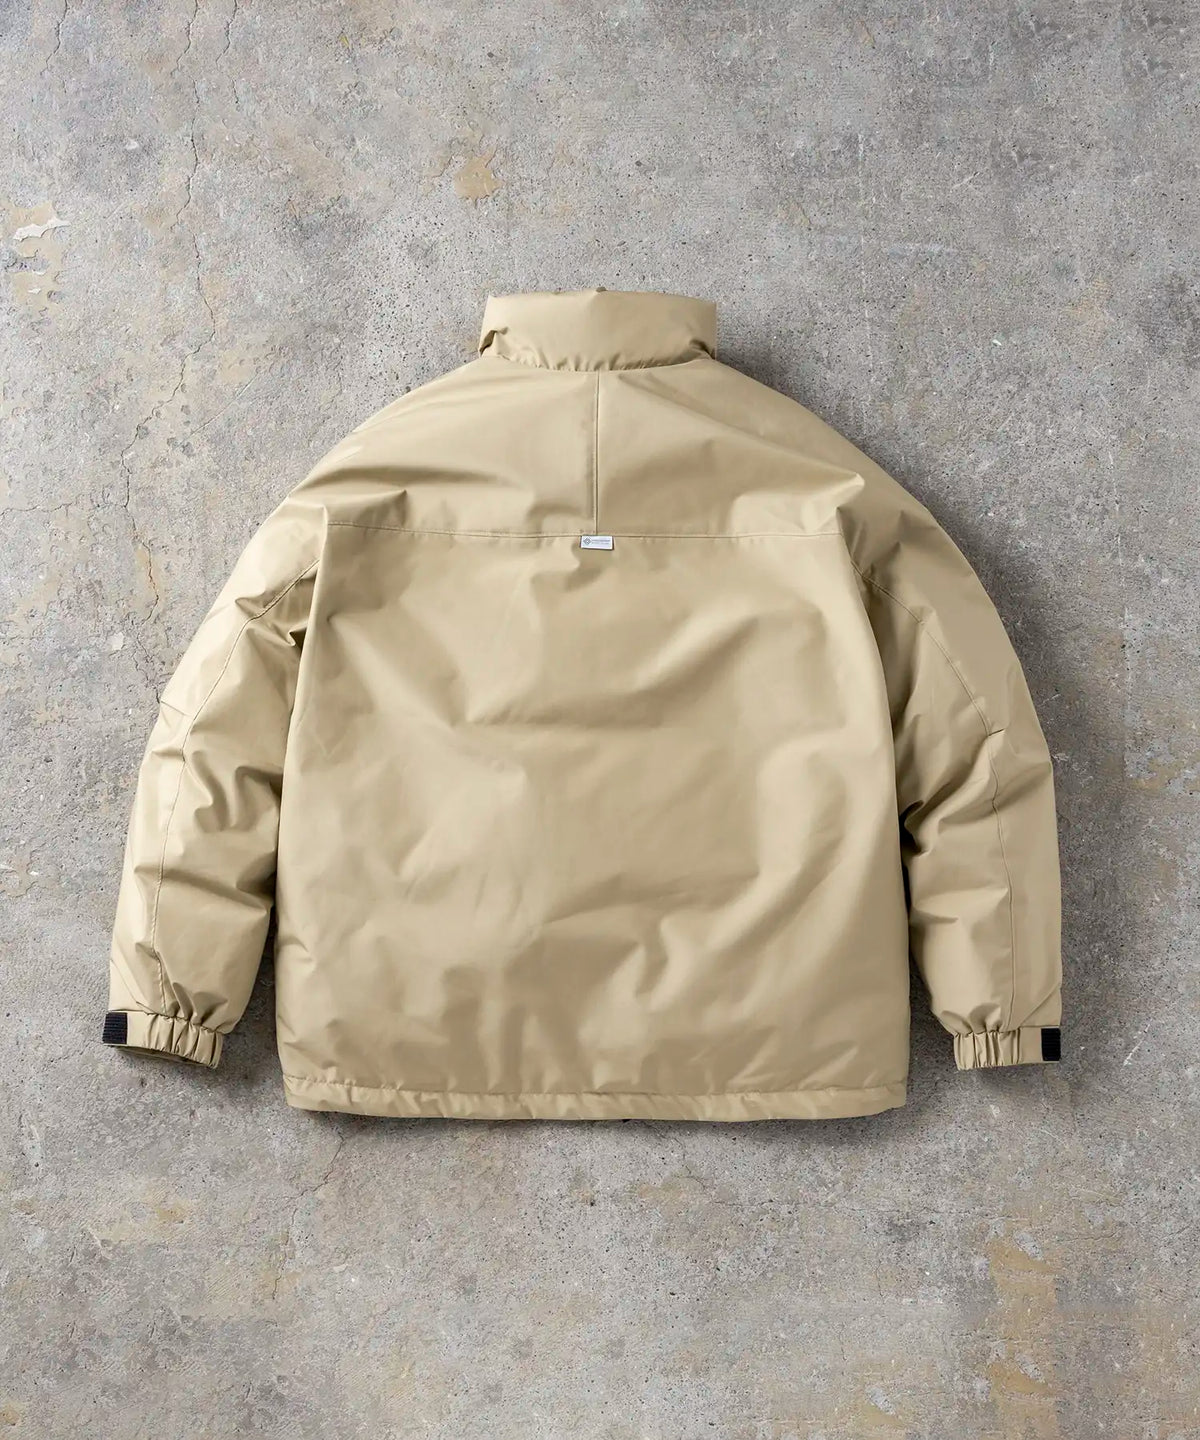 【MENS】GORE DOWN L-7 JACKET / WINDSTOPPER(R) プロダクト BY GORE‑TEX LABS 2023年10月下旬お届け